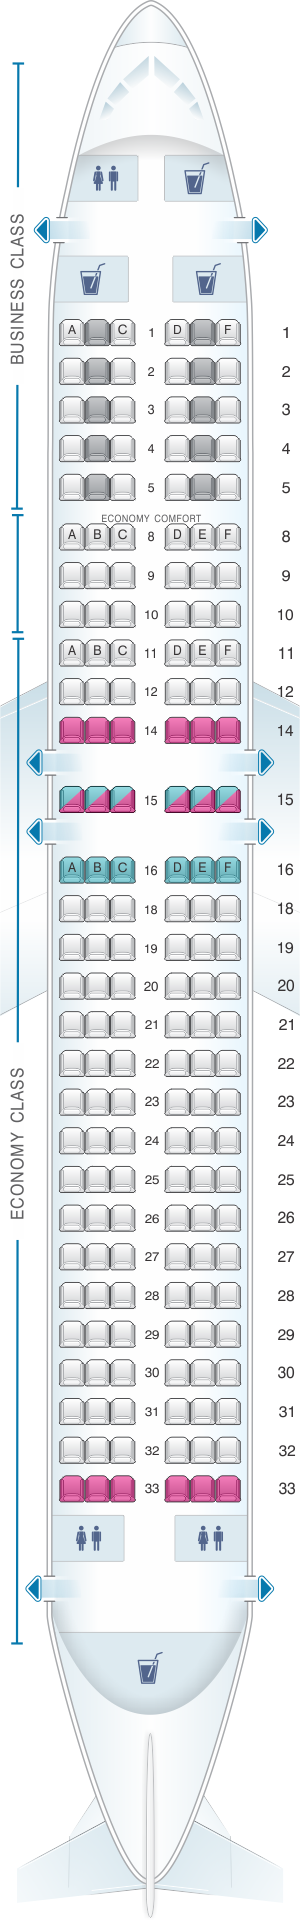 Seat map for KLM Boeing B737 900